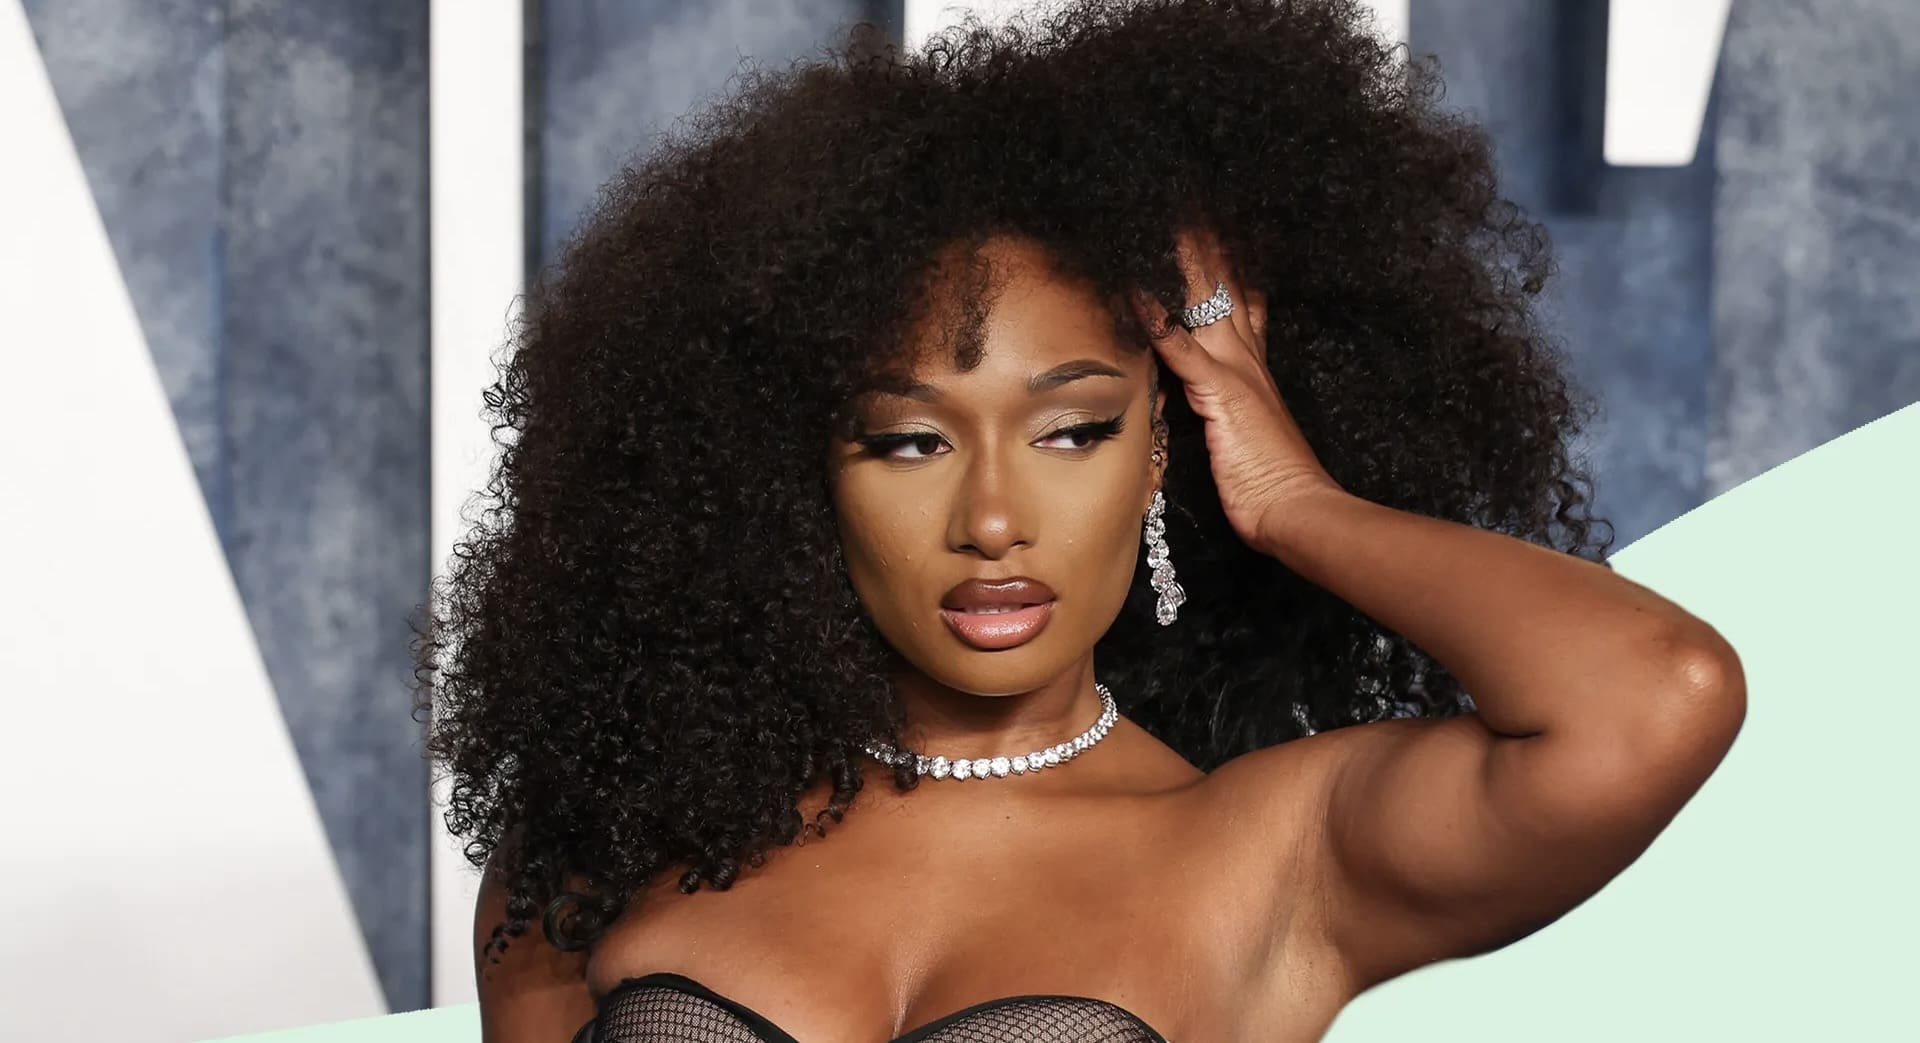 Megan Thee Stallion Opened Up About The Tory Lanez Shooting Case For ‘The Final Time’ In A Touching New Essay